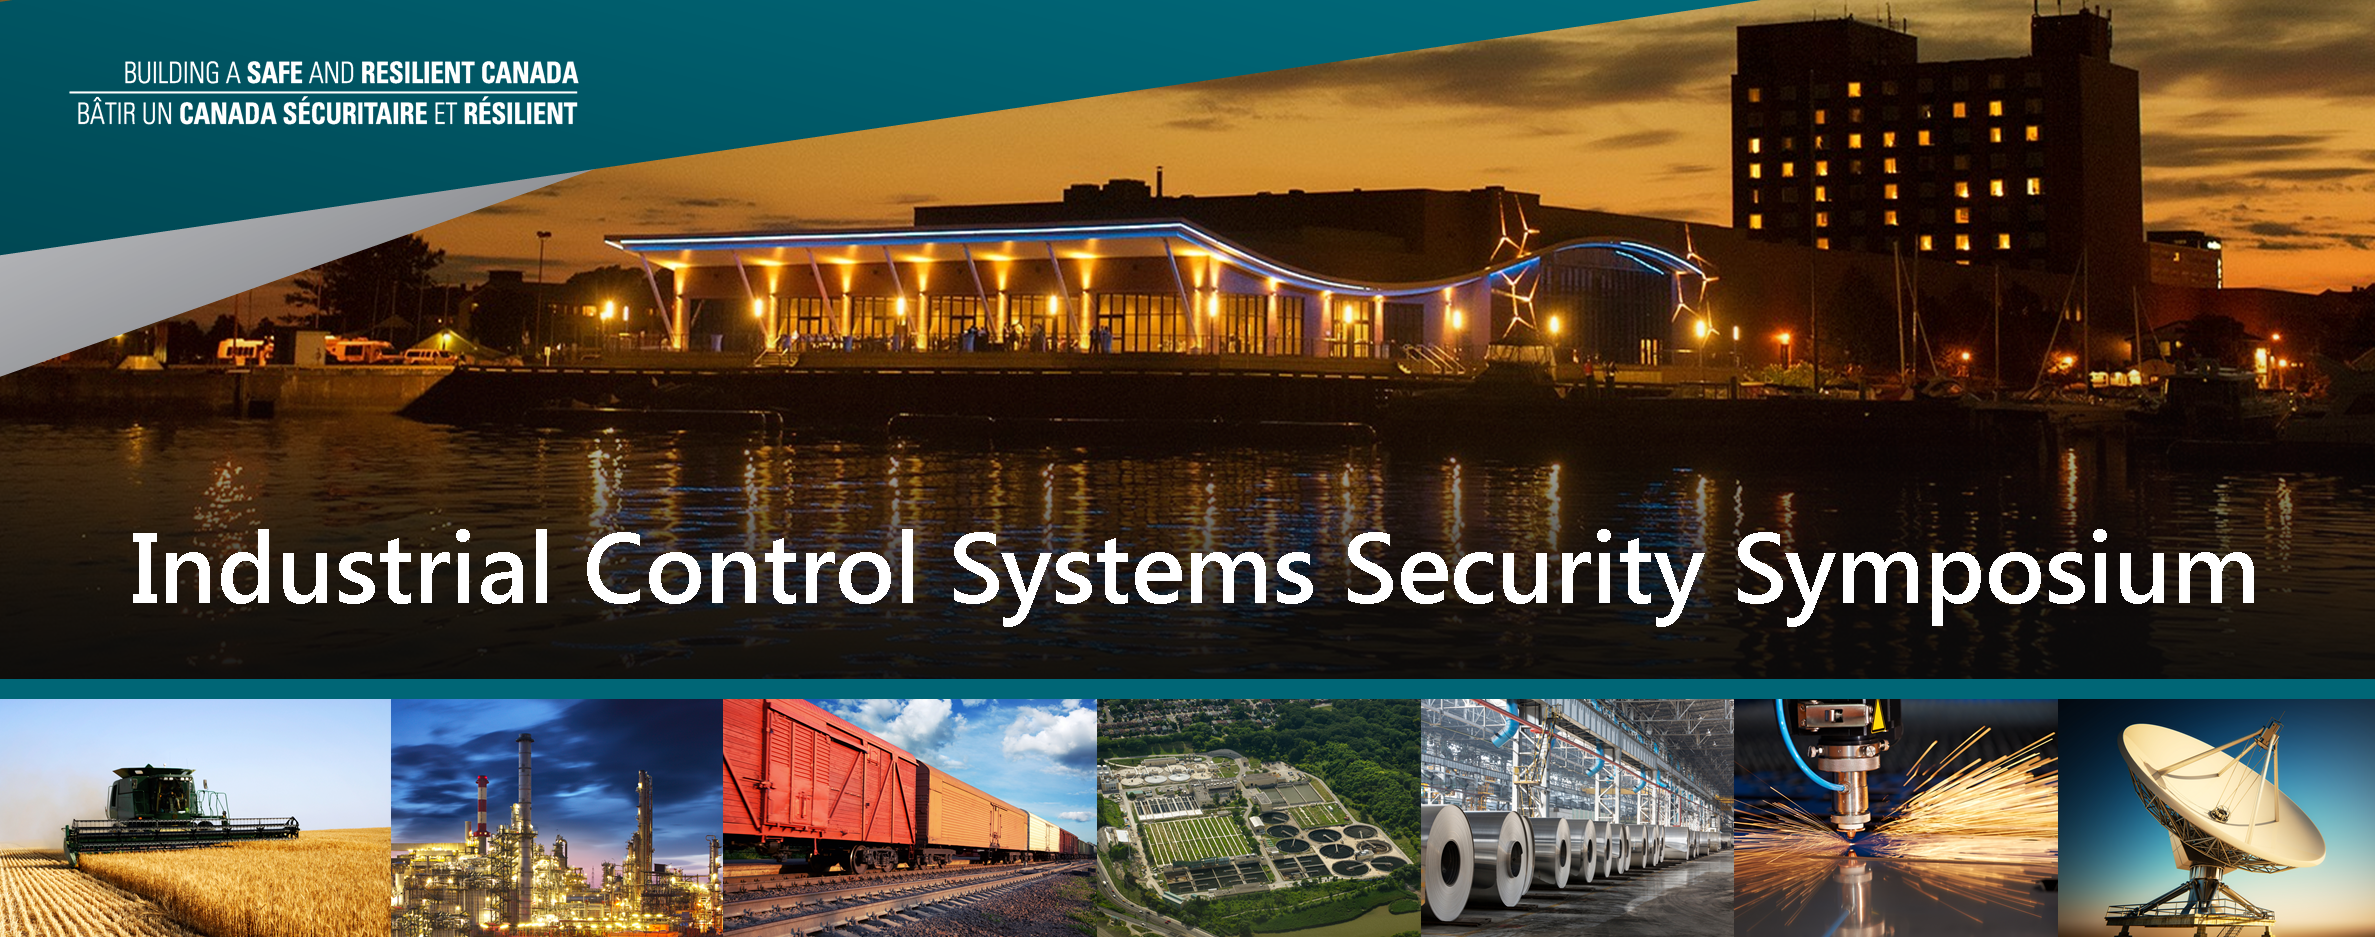 Annual Industrial Control Systems (ICS) Security Symposium